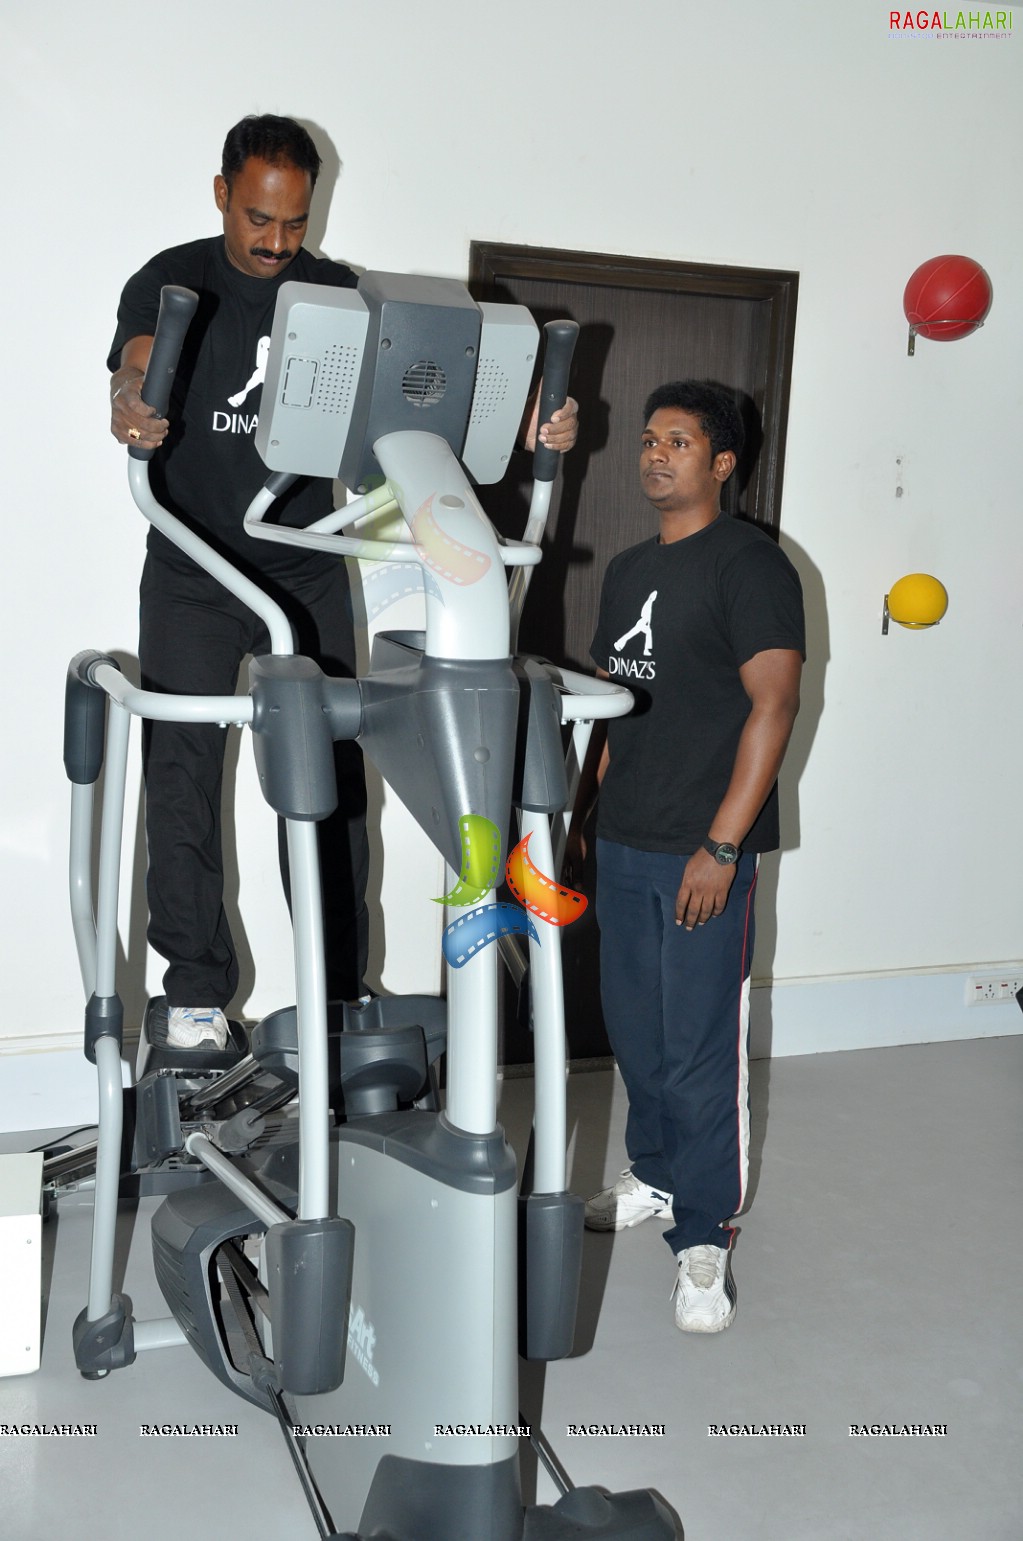 'Specialized Fitness Solutions' Launch